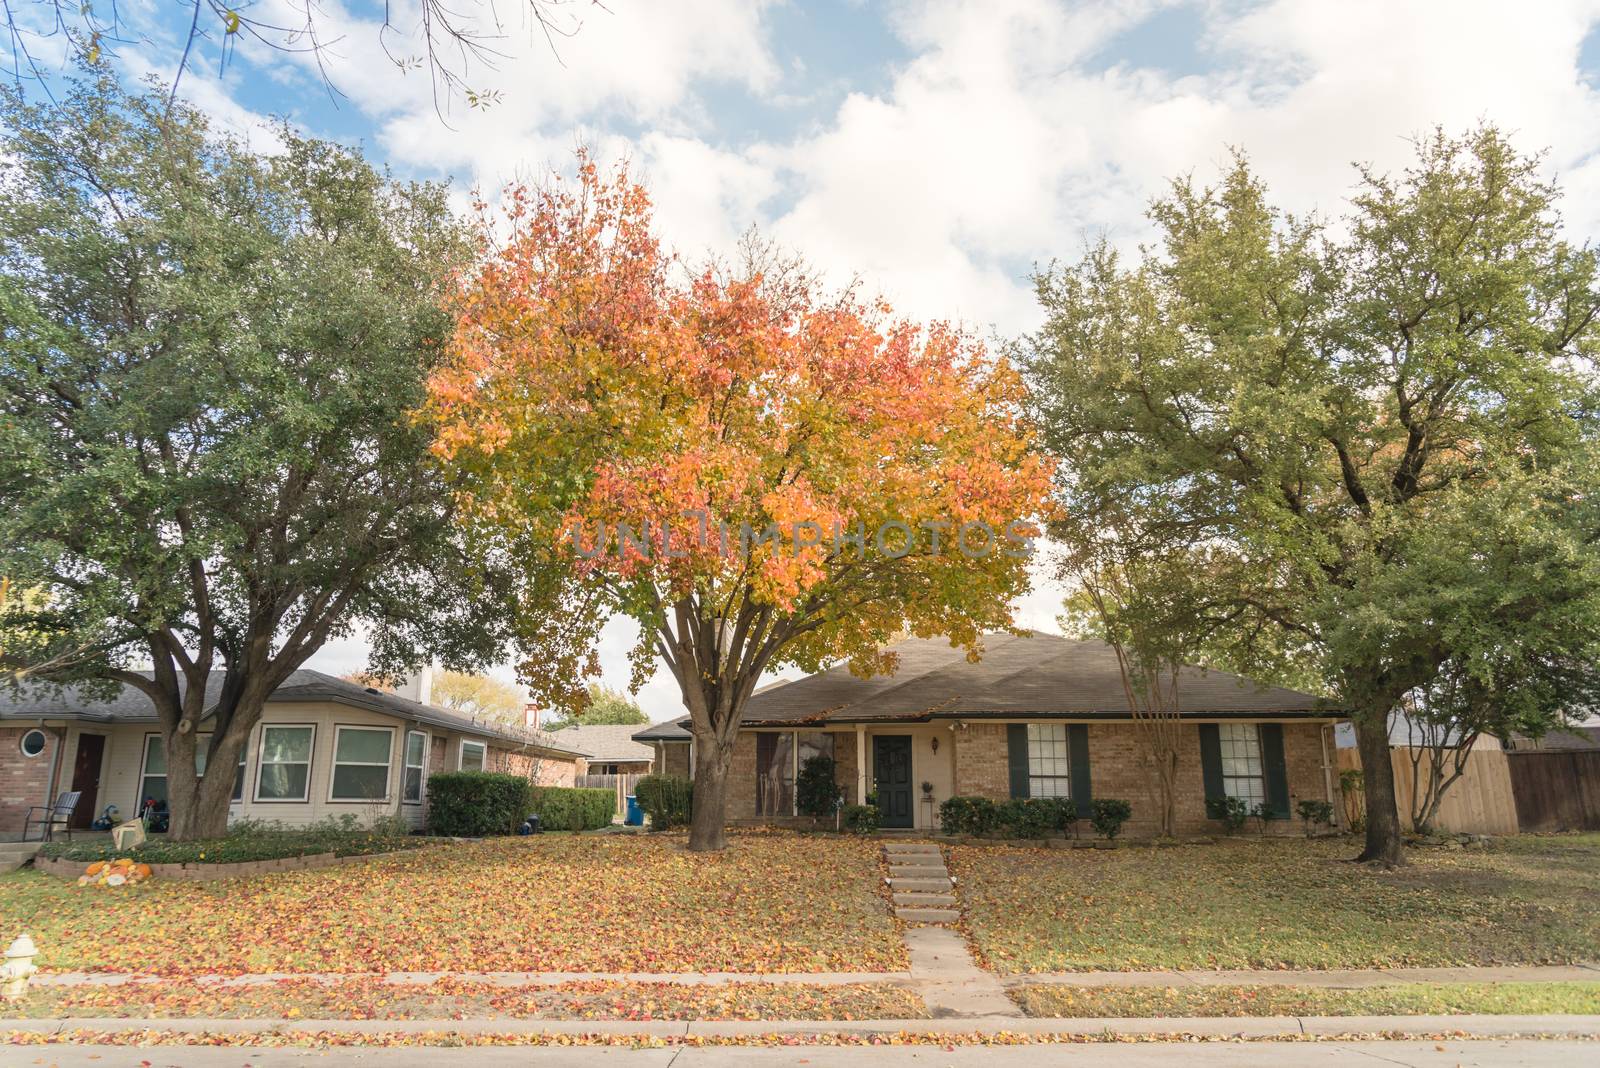 Typical front yard of single family houses near Dallas, Texas in fall season with colorful autumn leaves. Elevated sidewalk of one story house under mature trees with cloud blue sky